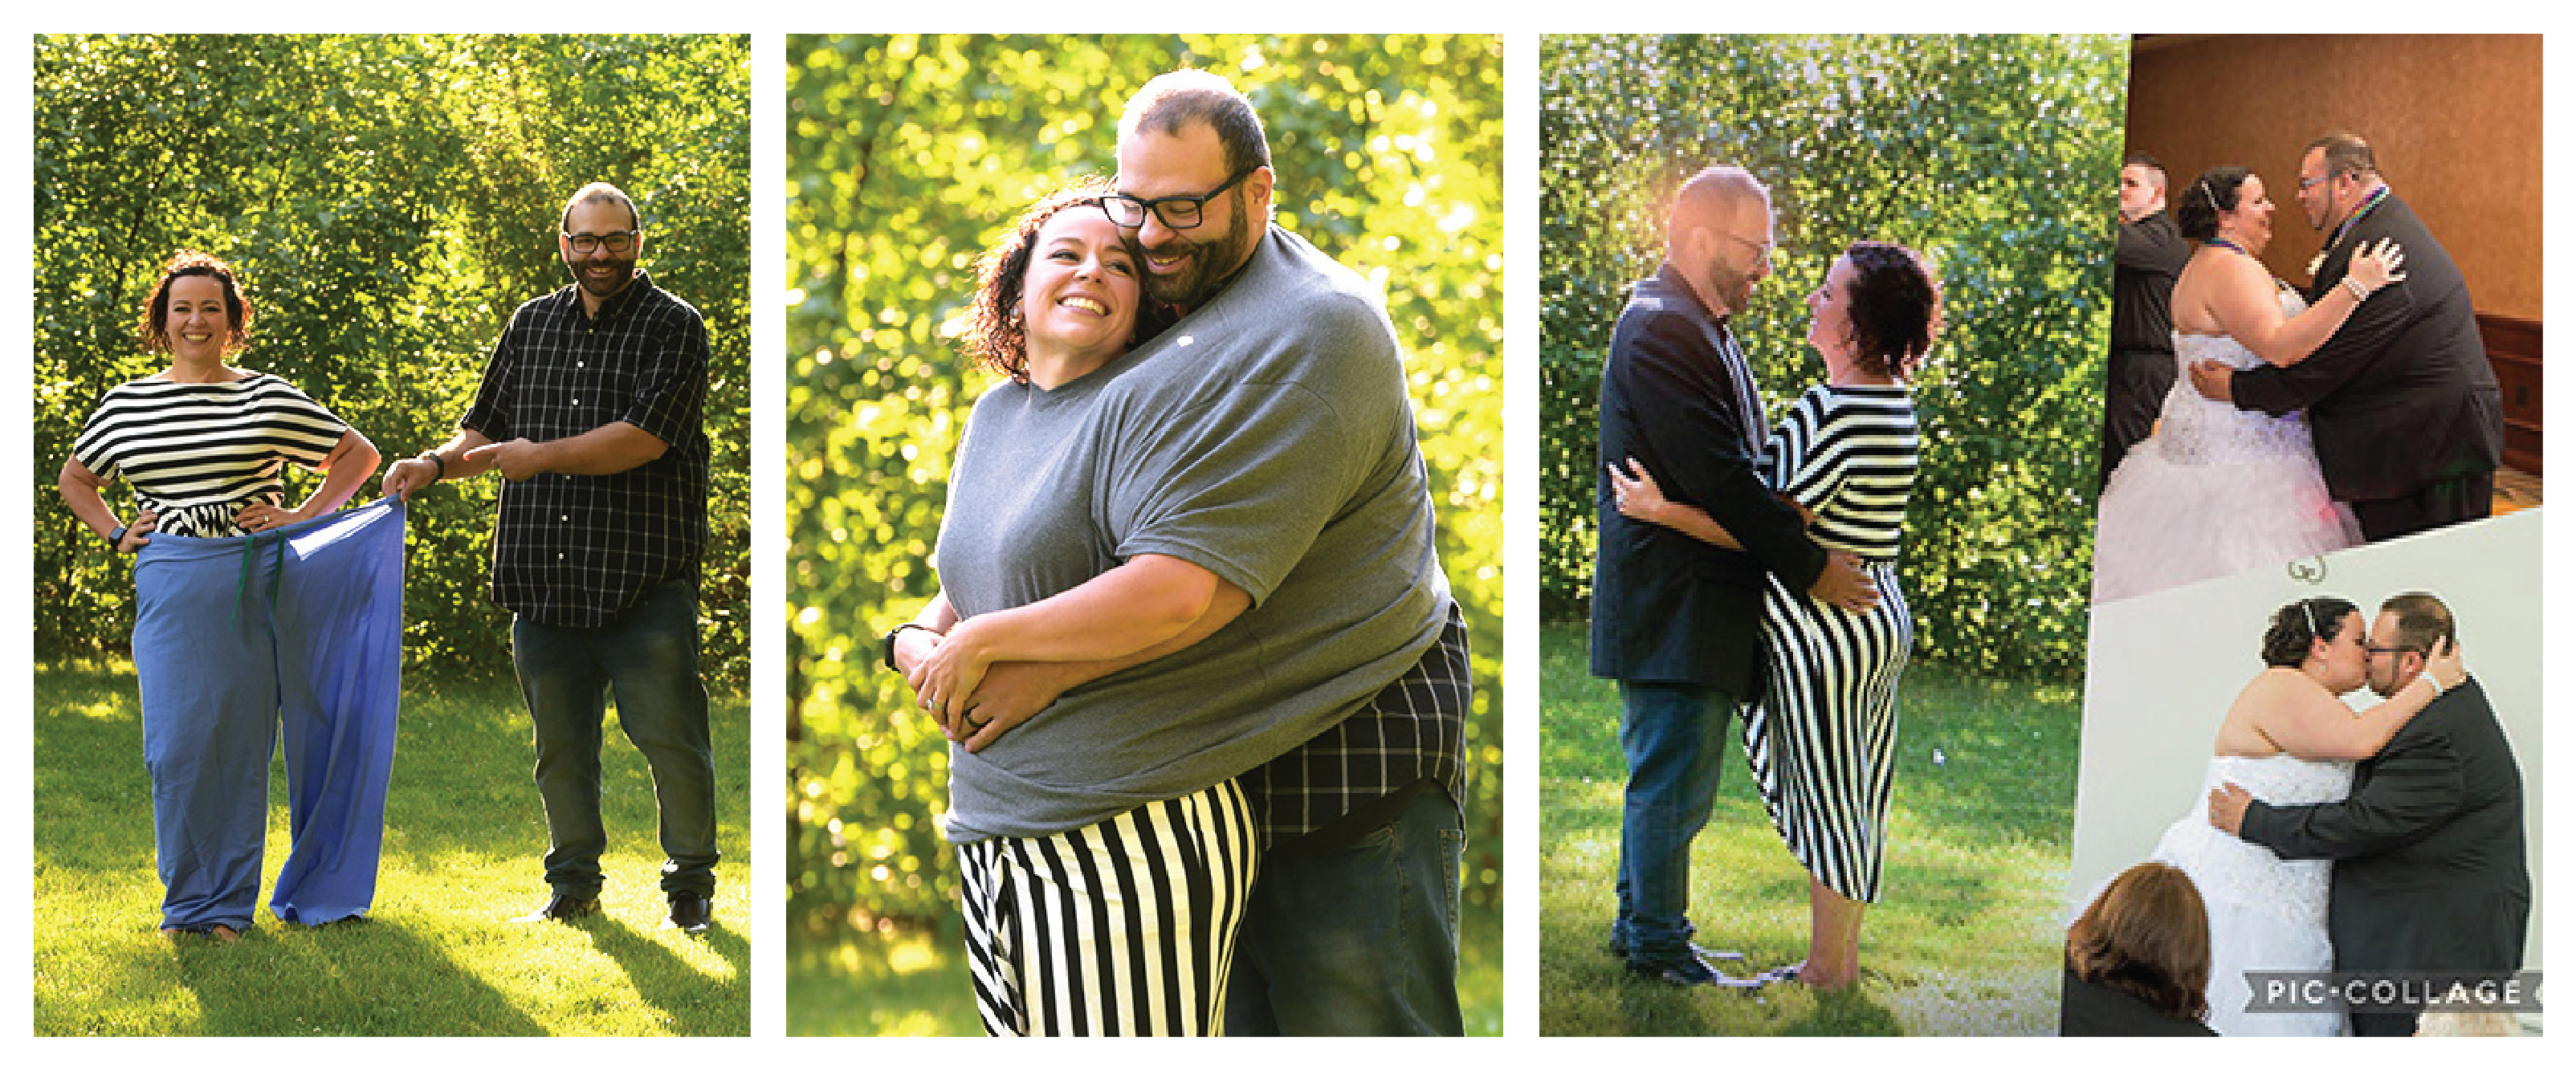 The Johnsons are proud of how far they've come on their bariatric program journey.